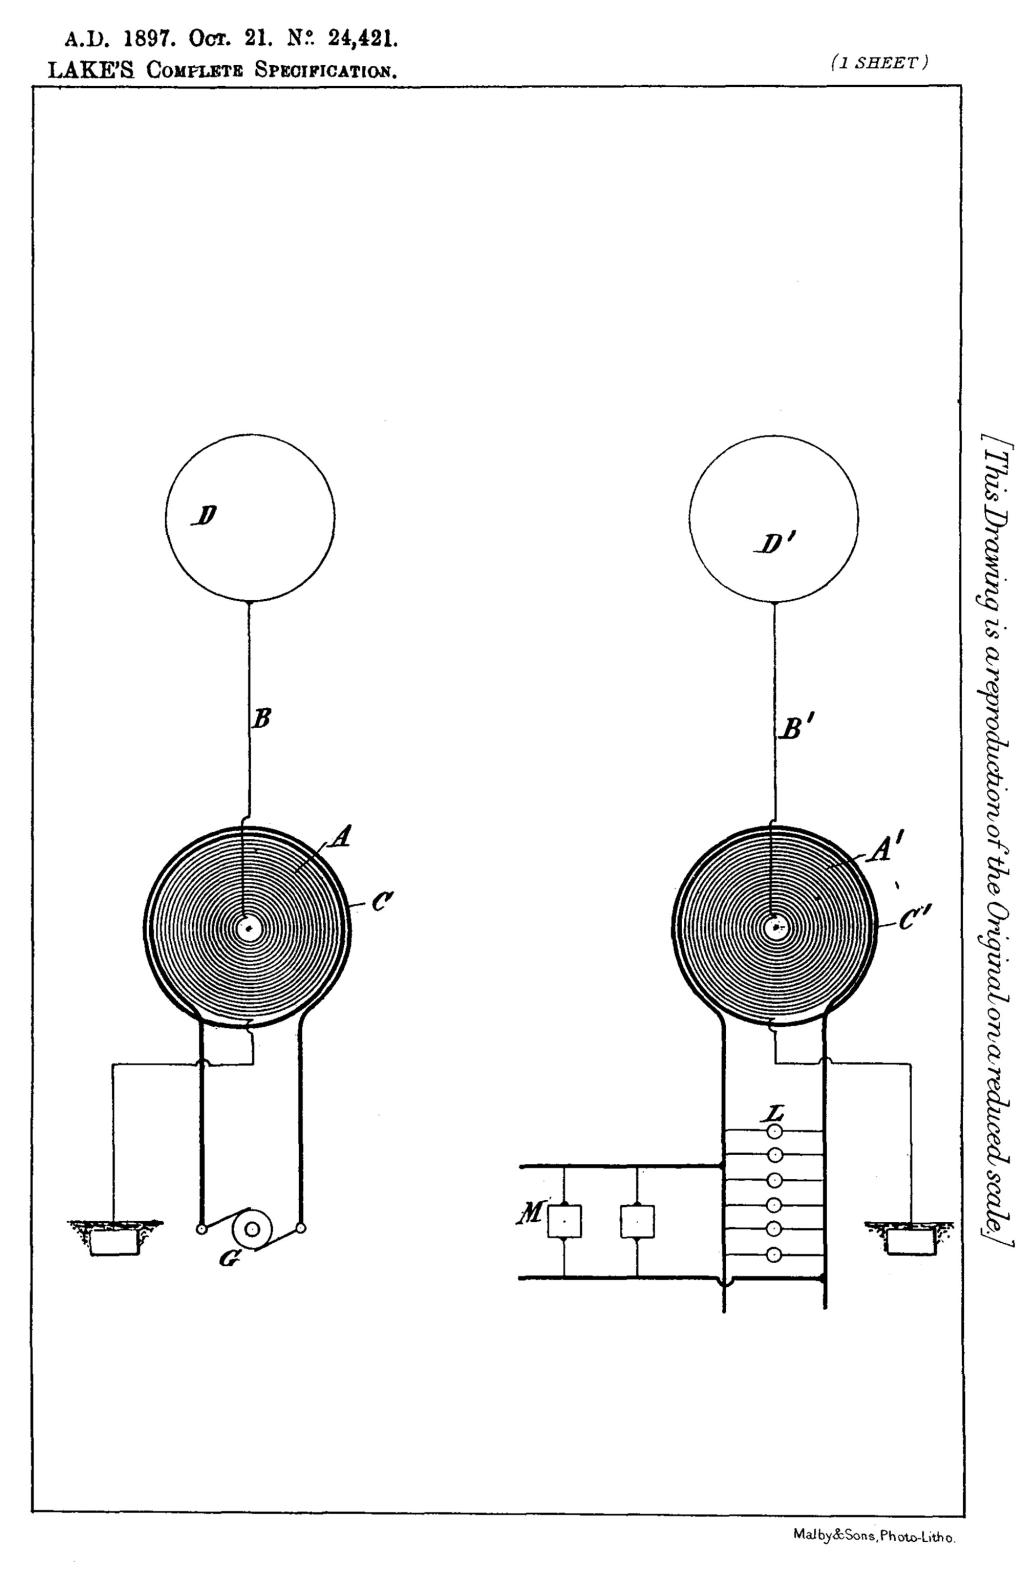 Nikola Tesla British Patent 24,421 - Improvements in Systems for the Transmission of Electrical Energy and Apparatus for Use Therein - Image 1